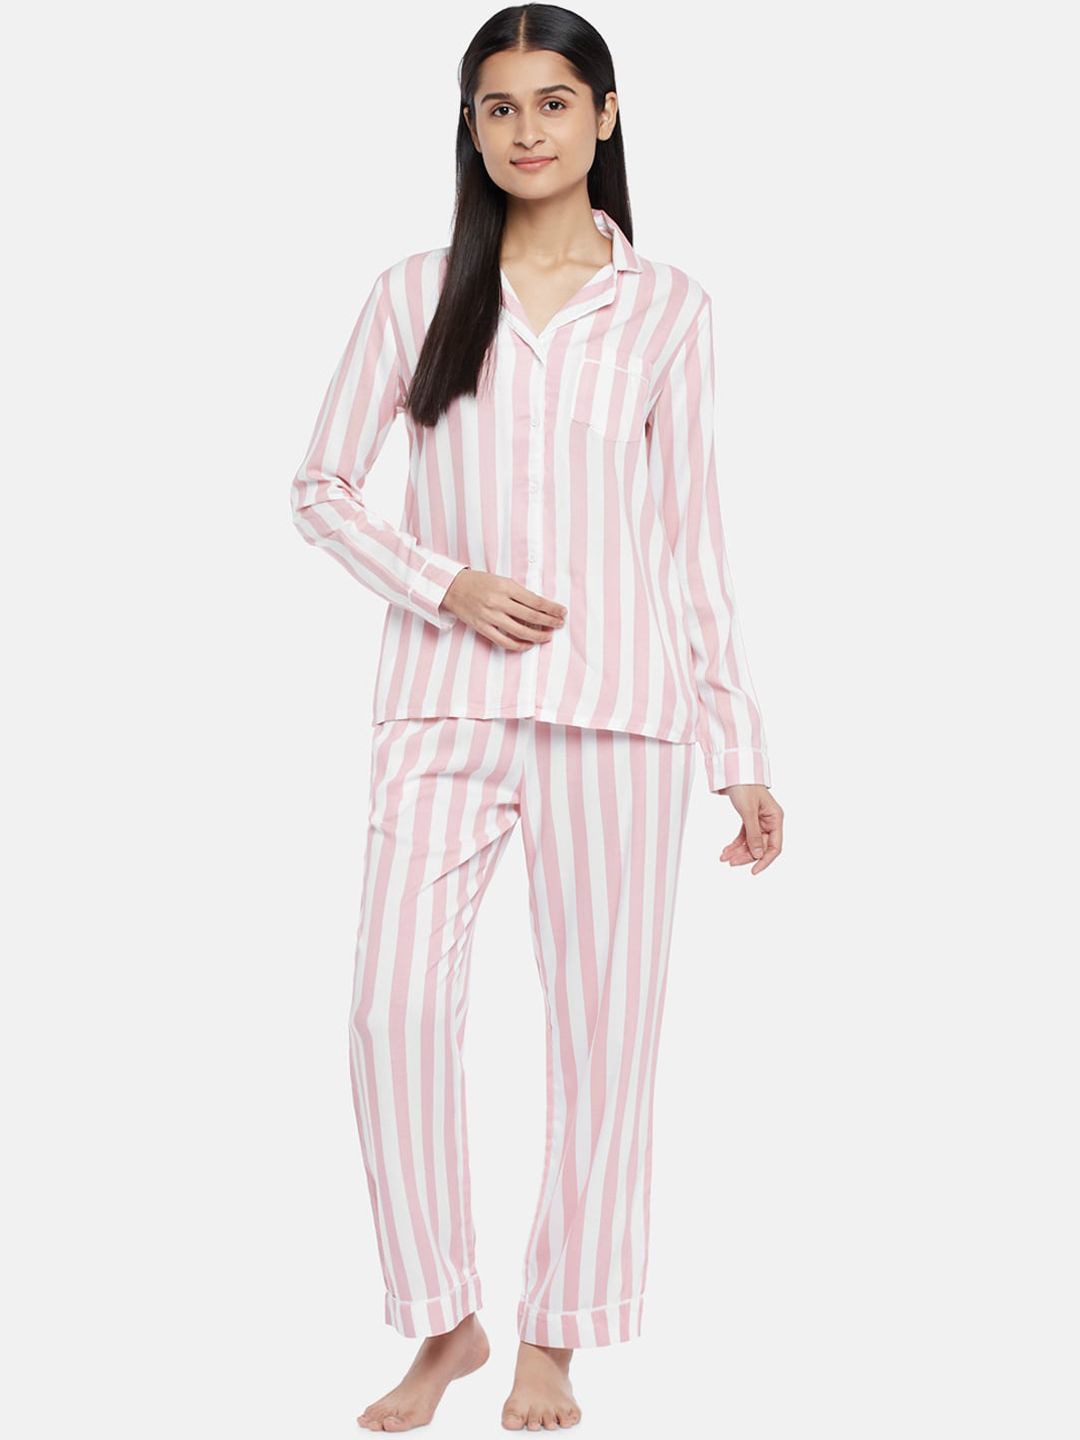 Dreamz by Pantaloons Women Pink Striped Night Suit Price in India